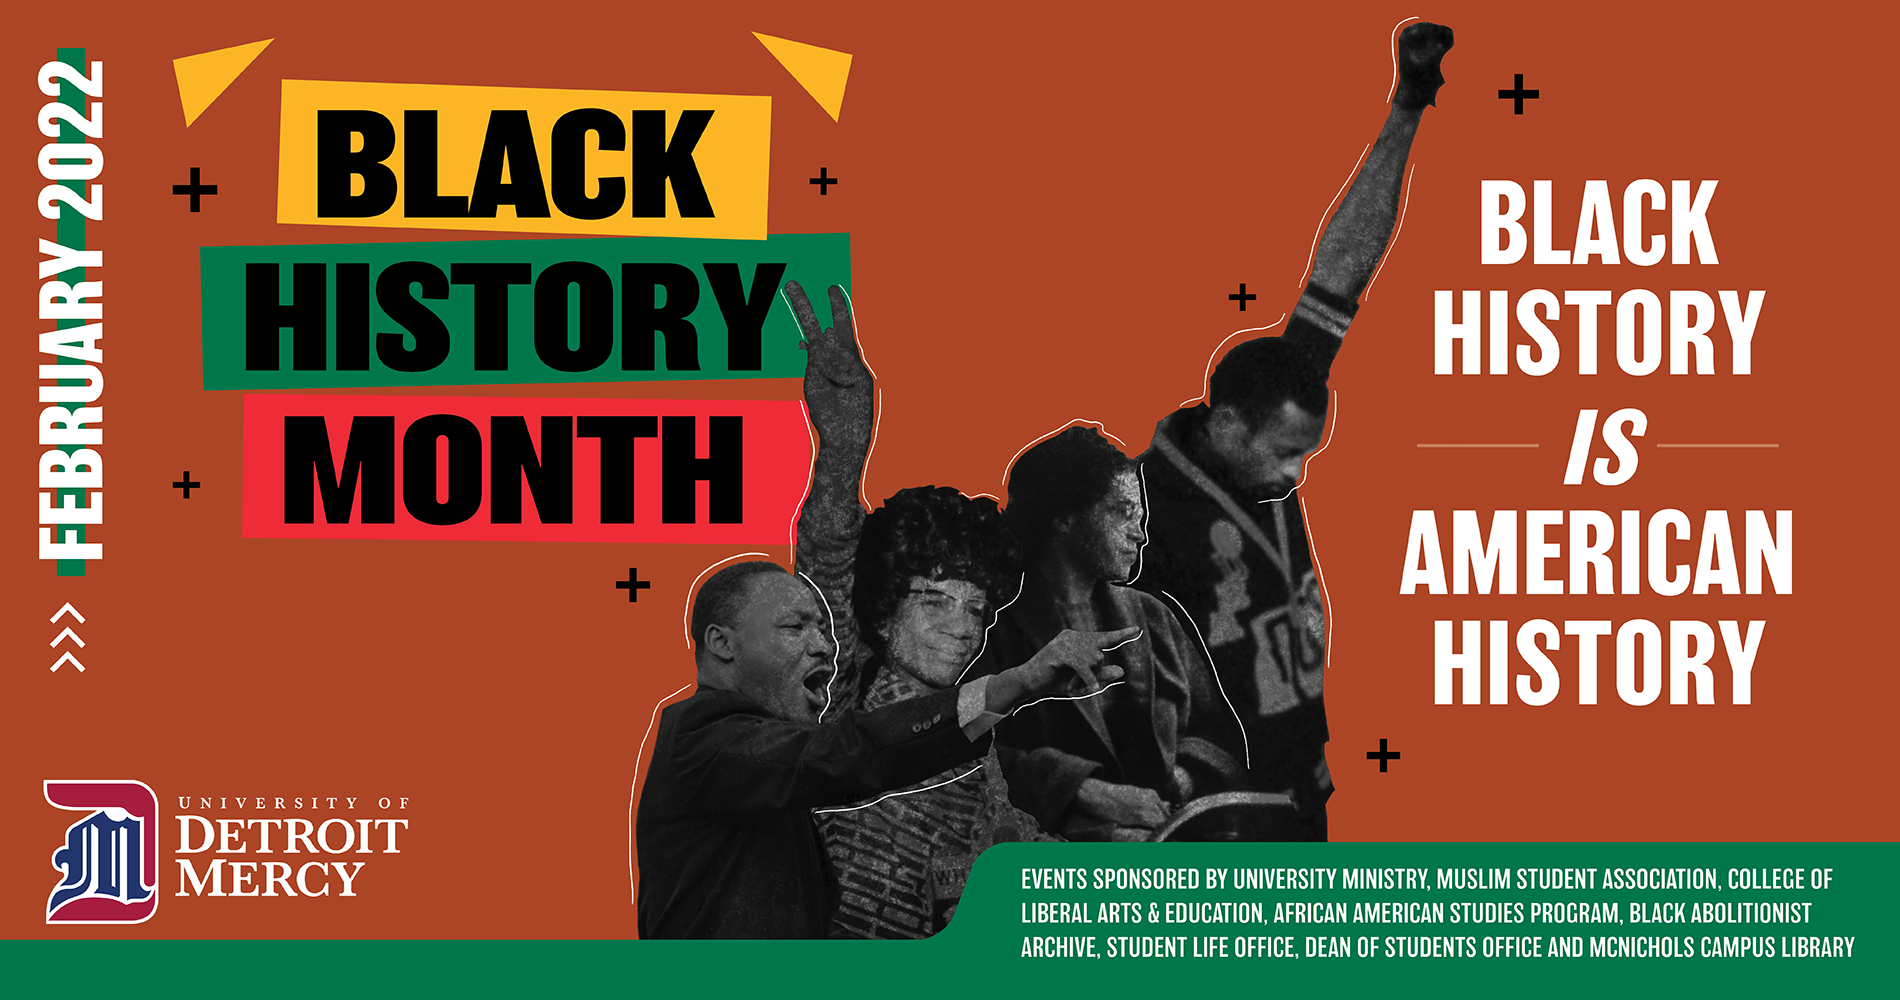 A graphic promoting University of Detroit Mercy's Black History Month celebration, featuring red, green and yellow colored boxes behind the words "Black History Month" and black and white images of several historic Black figures. The graphic includes Detroit Mercy's logo and the following text: February 2022, Black History is American History, events sponsored by University Ministry, Muslim Student Association, College of Liberal Arts & Education, African American Studies Program, Black Abolitionist Archive, Student Life Office, Dean of Students Office and McNichols Campus Library.